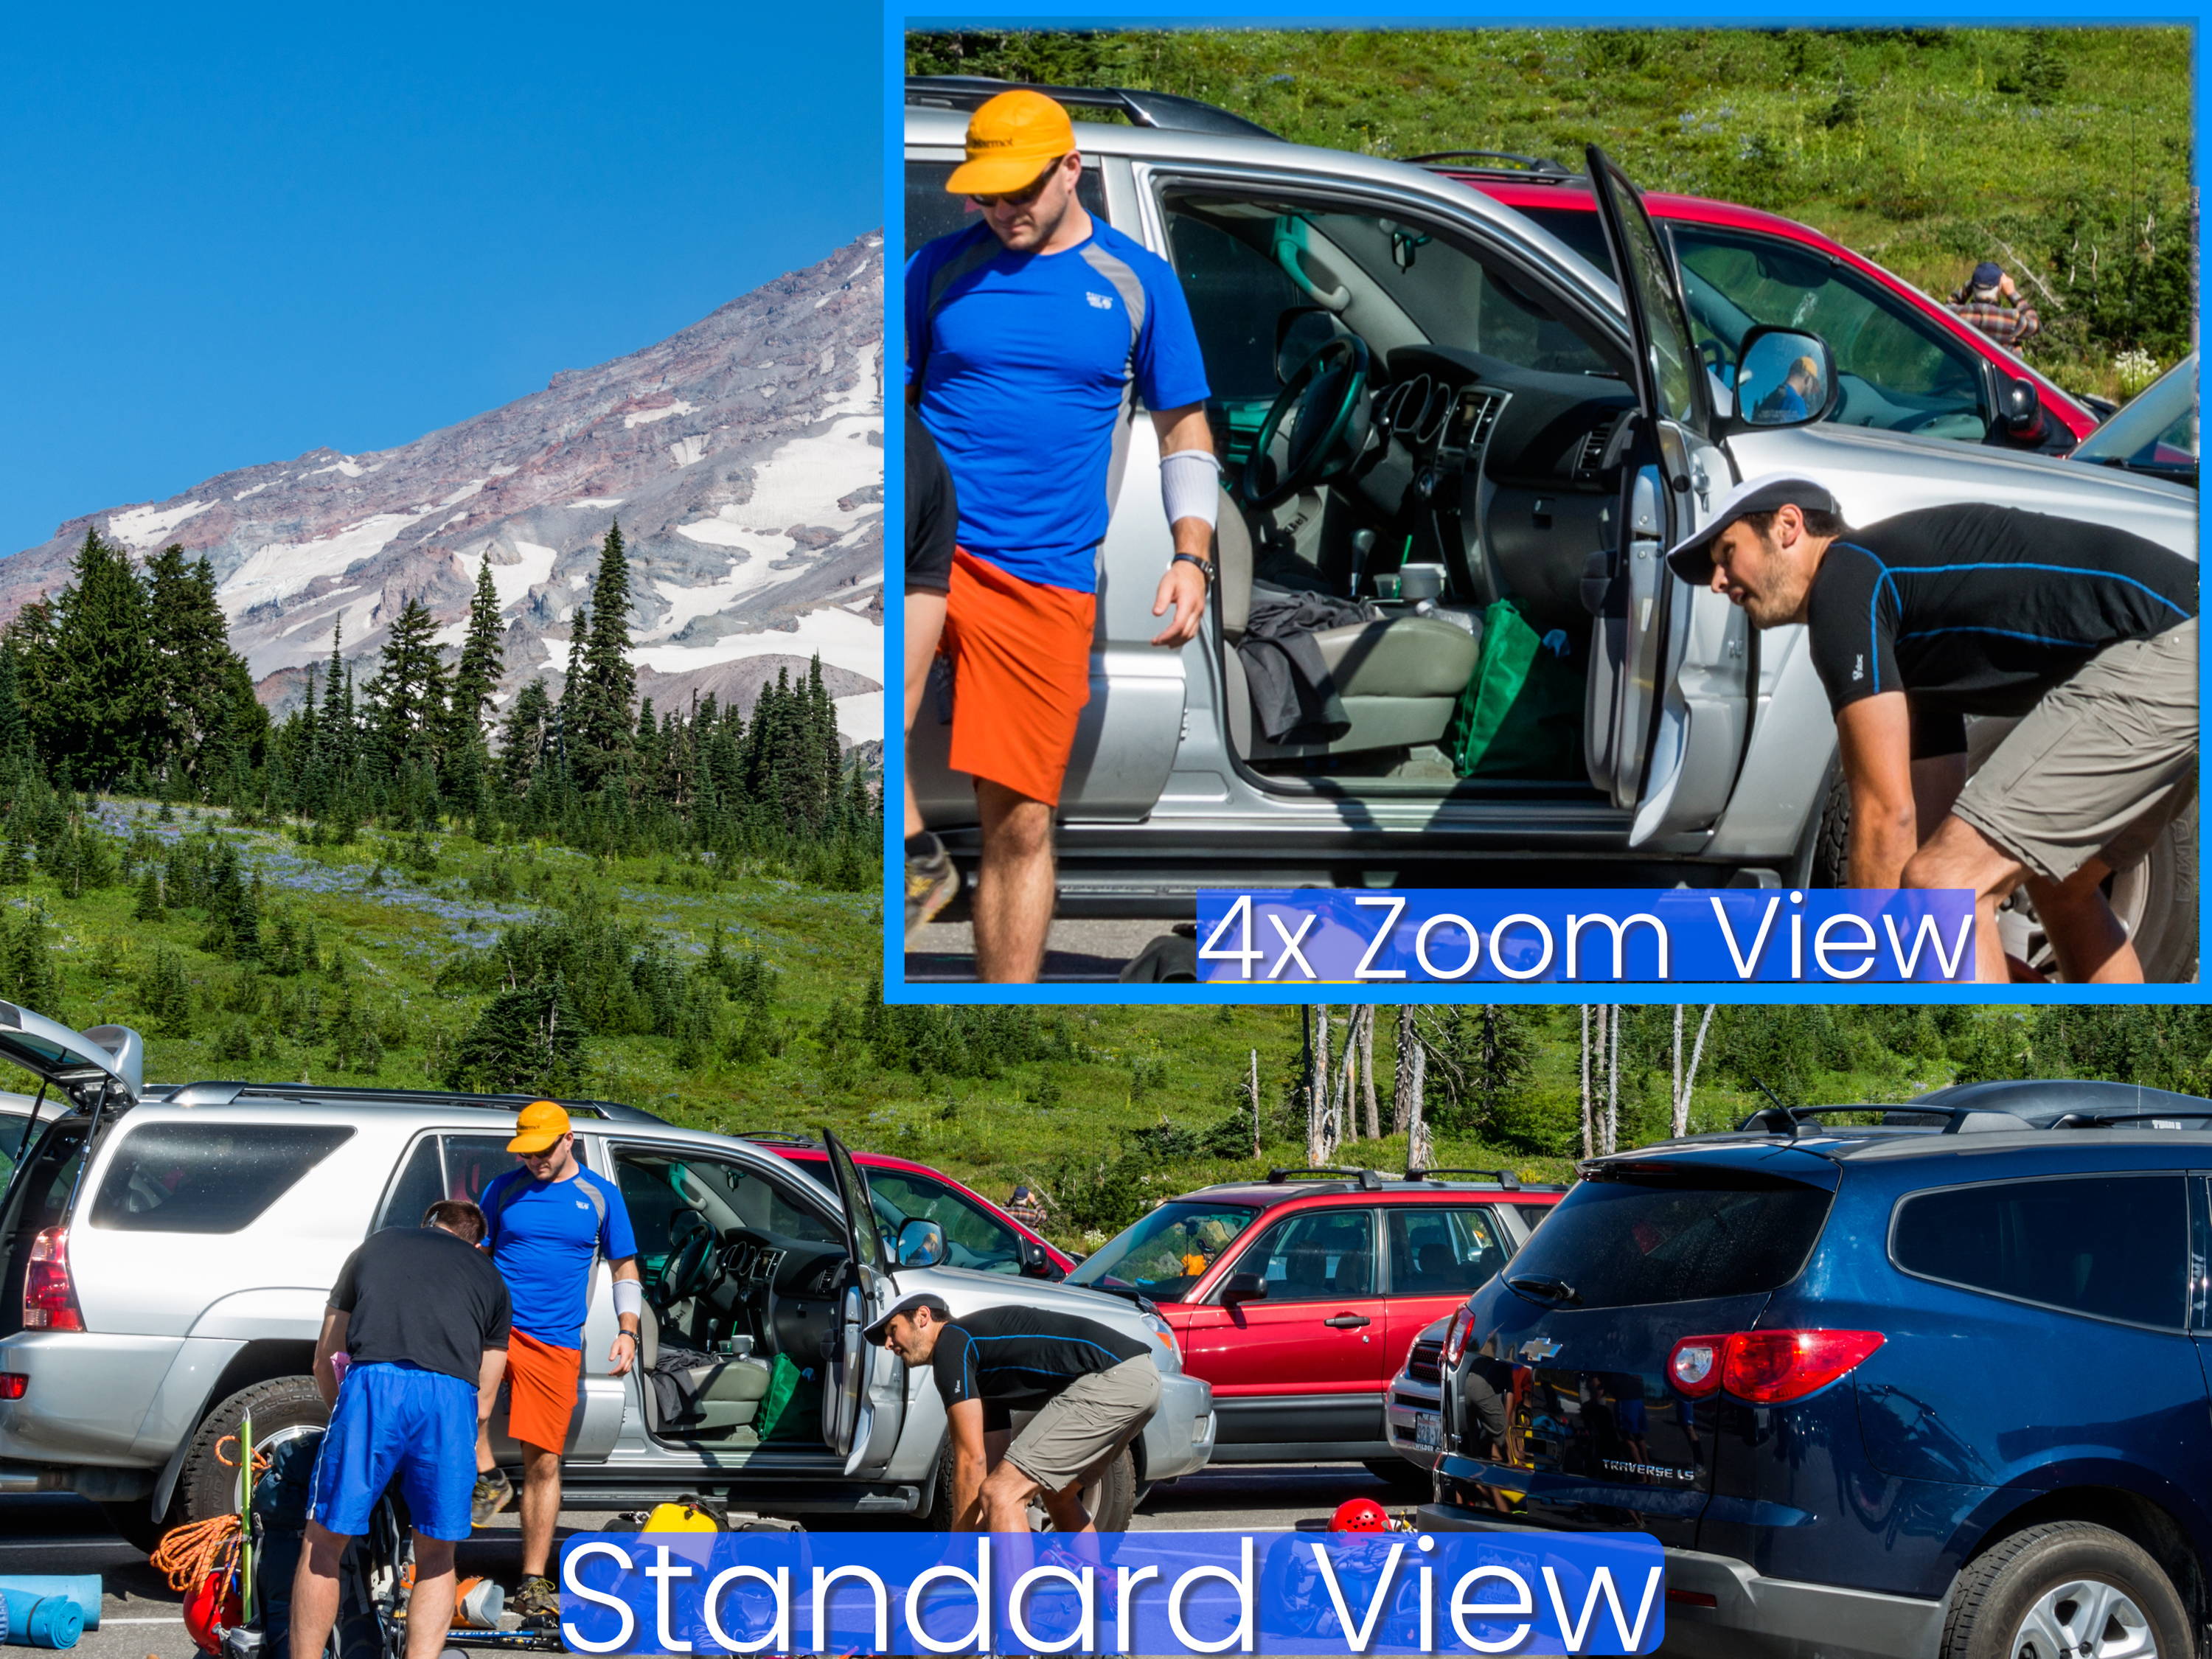 Standard view vs 4x optical zoom view